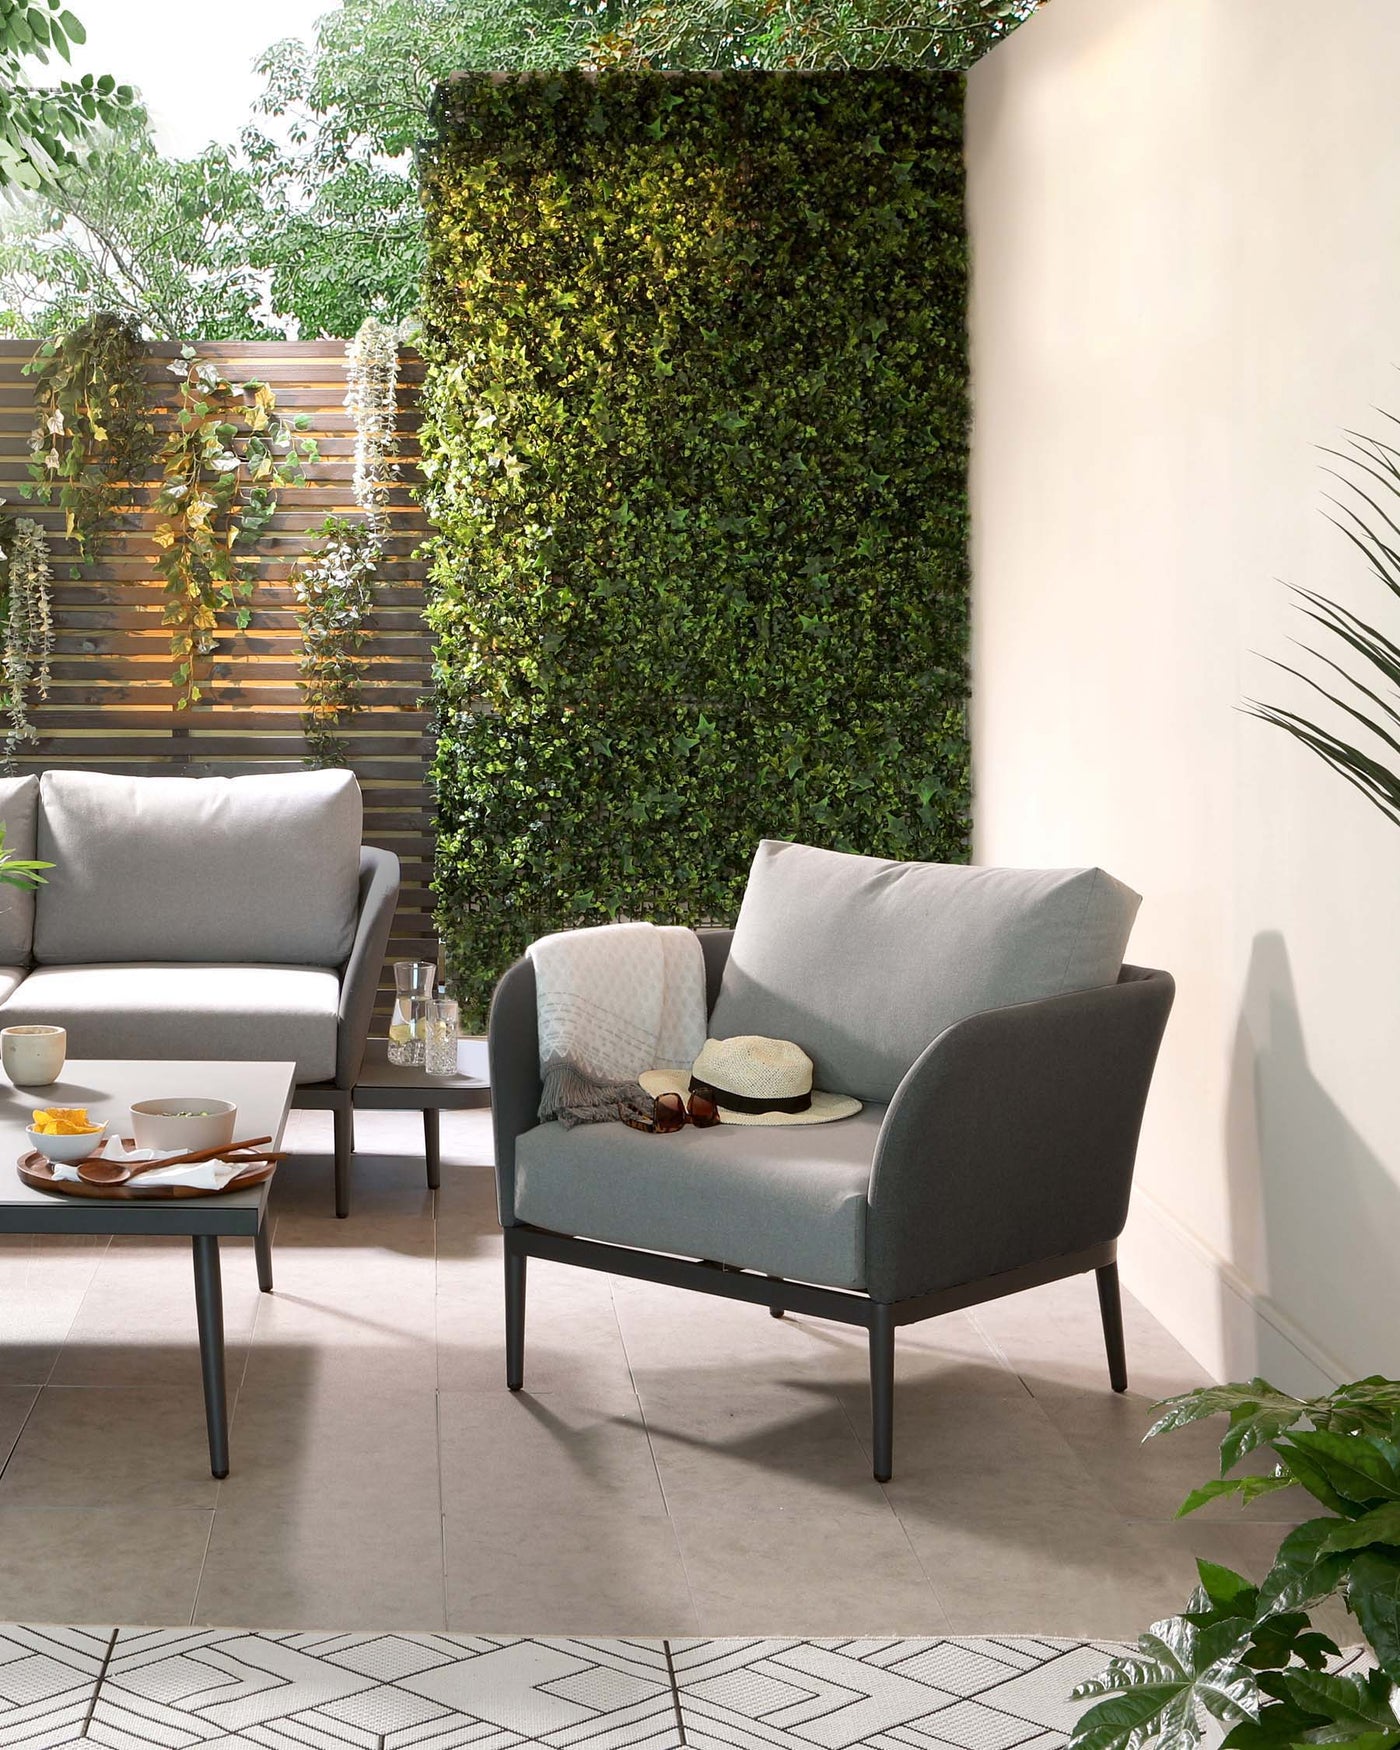 Modern outdoor furniture set with sleek metal frames, including a two-seater sofa and an armchair with clean lines, upholstered in a neutral grey fabric. A matching square low table with a white tabletop is positioned in front of the sofa, holding a tray with a teapot and cups, flanked by assorted decorative items and a small plant.